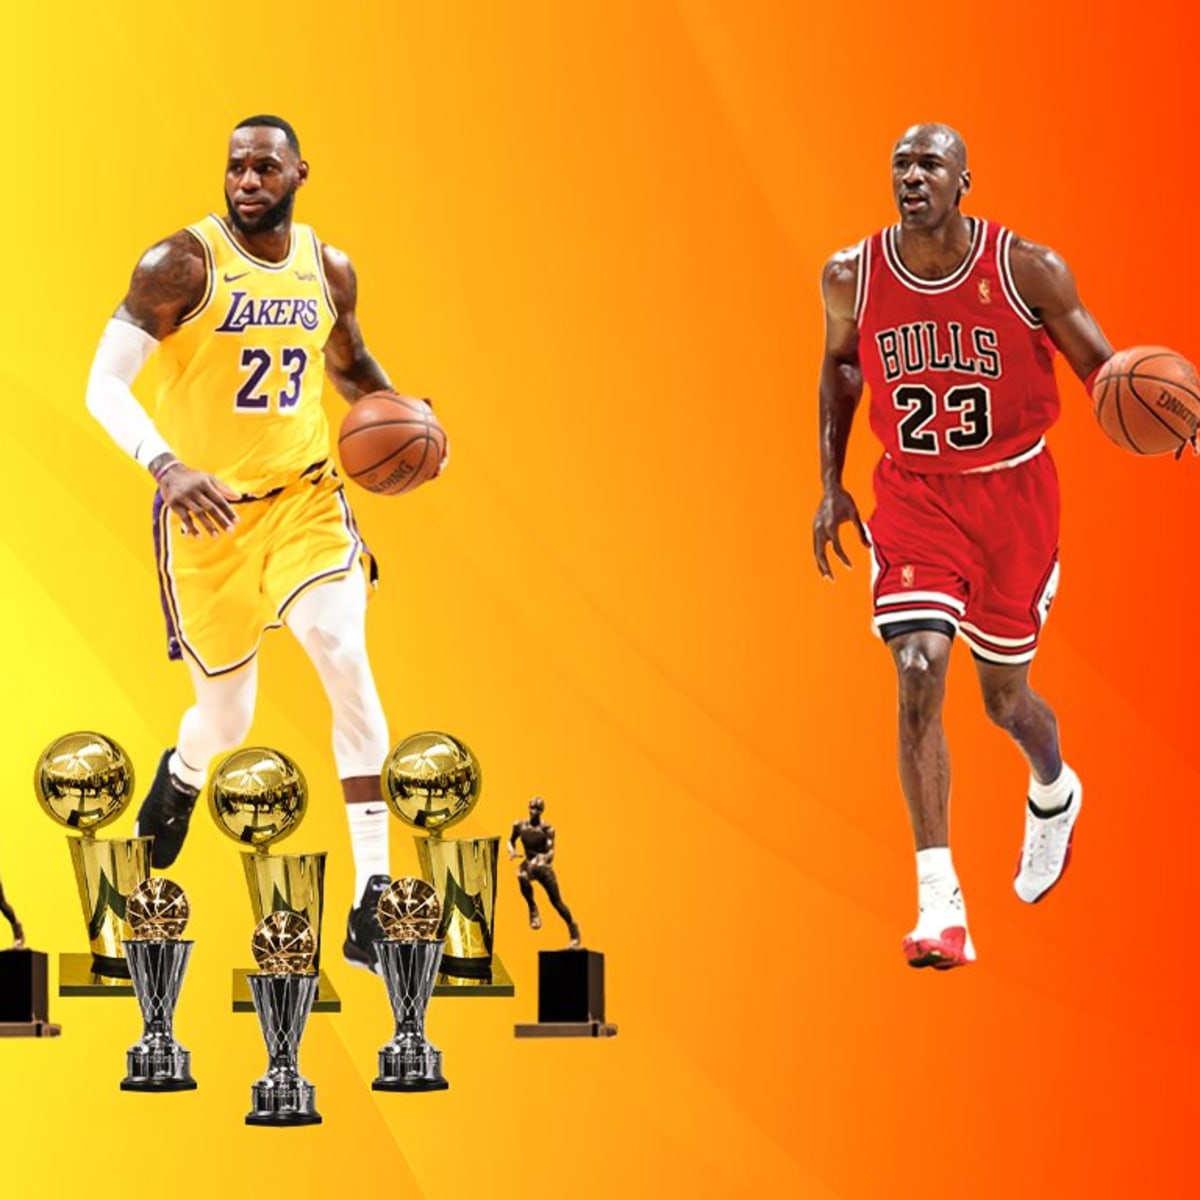 LeBron James has to three-peat with the Lakers to eclipse Michael Jordan